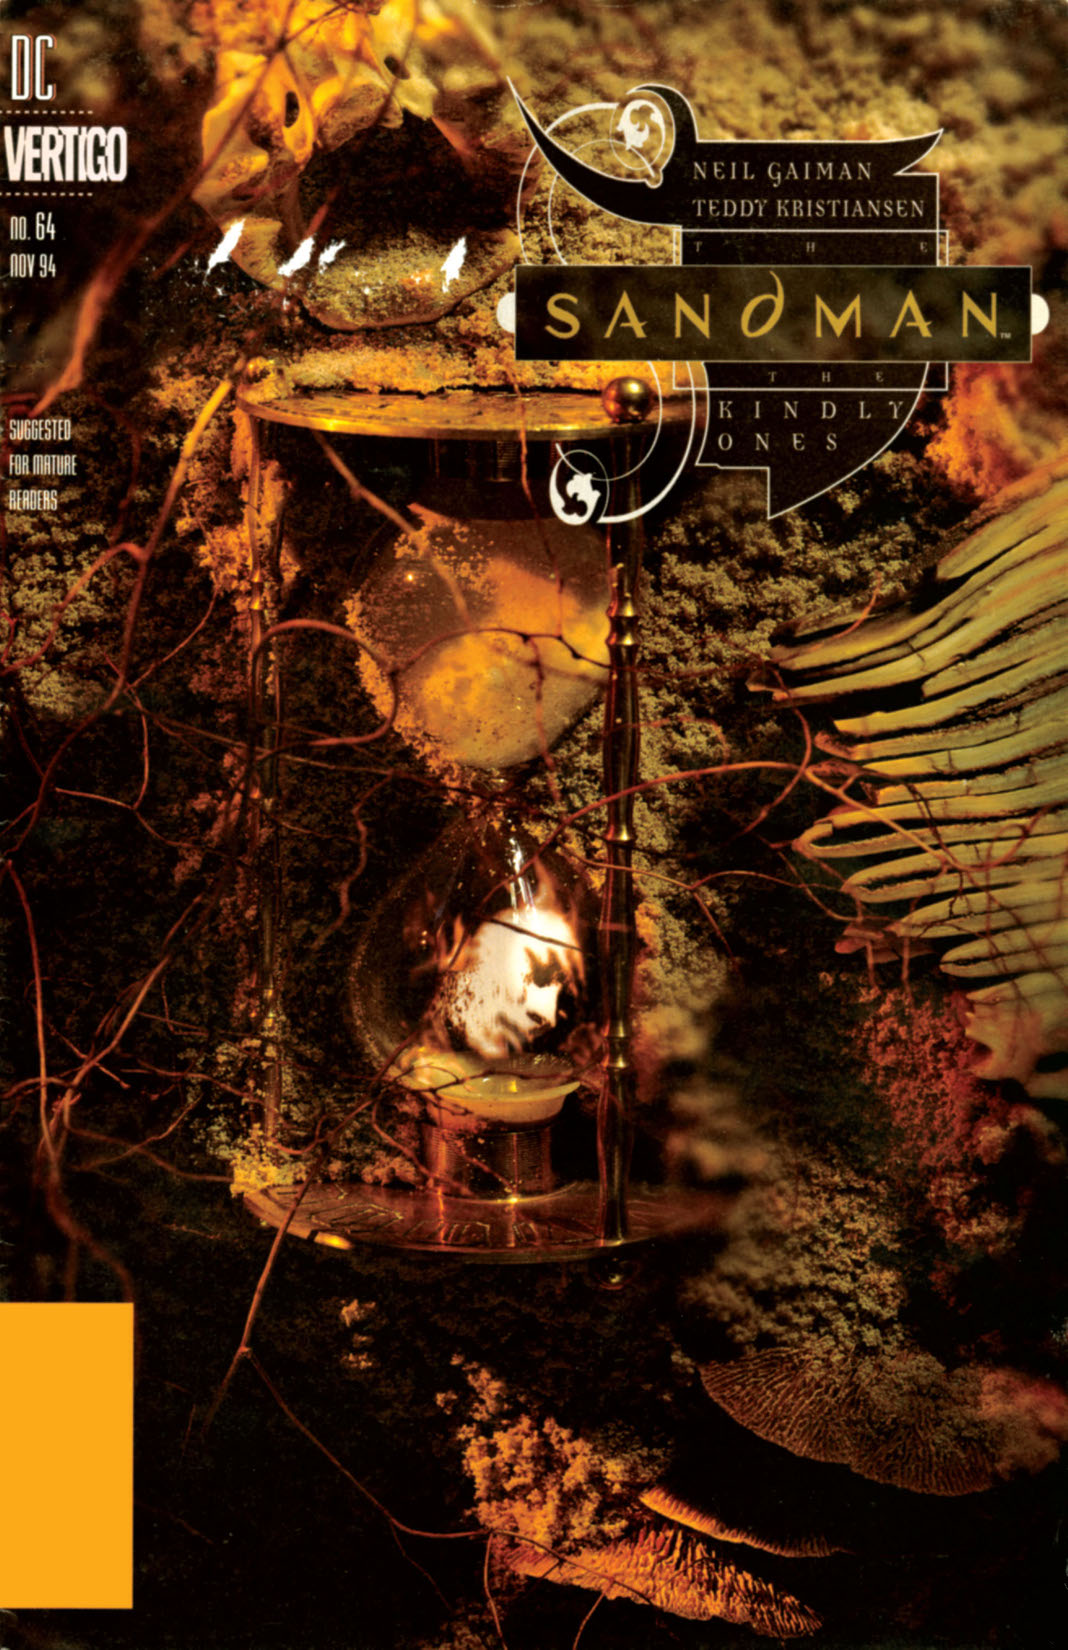 The Sandman #64 preview images